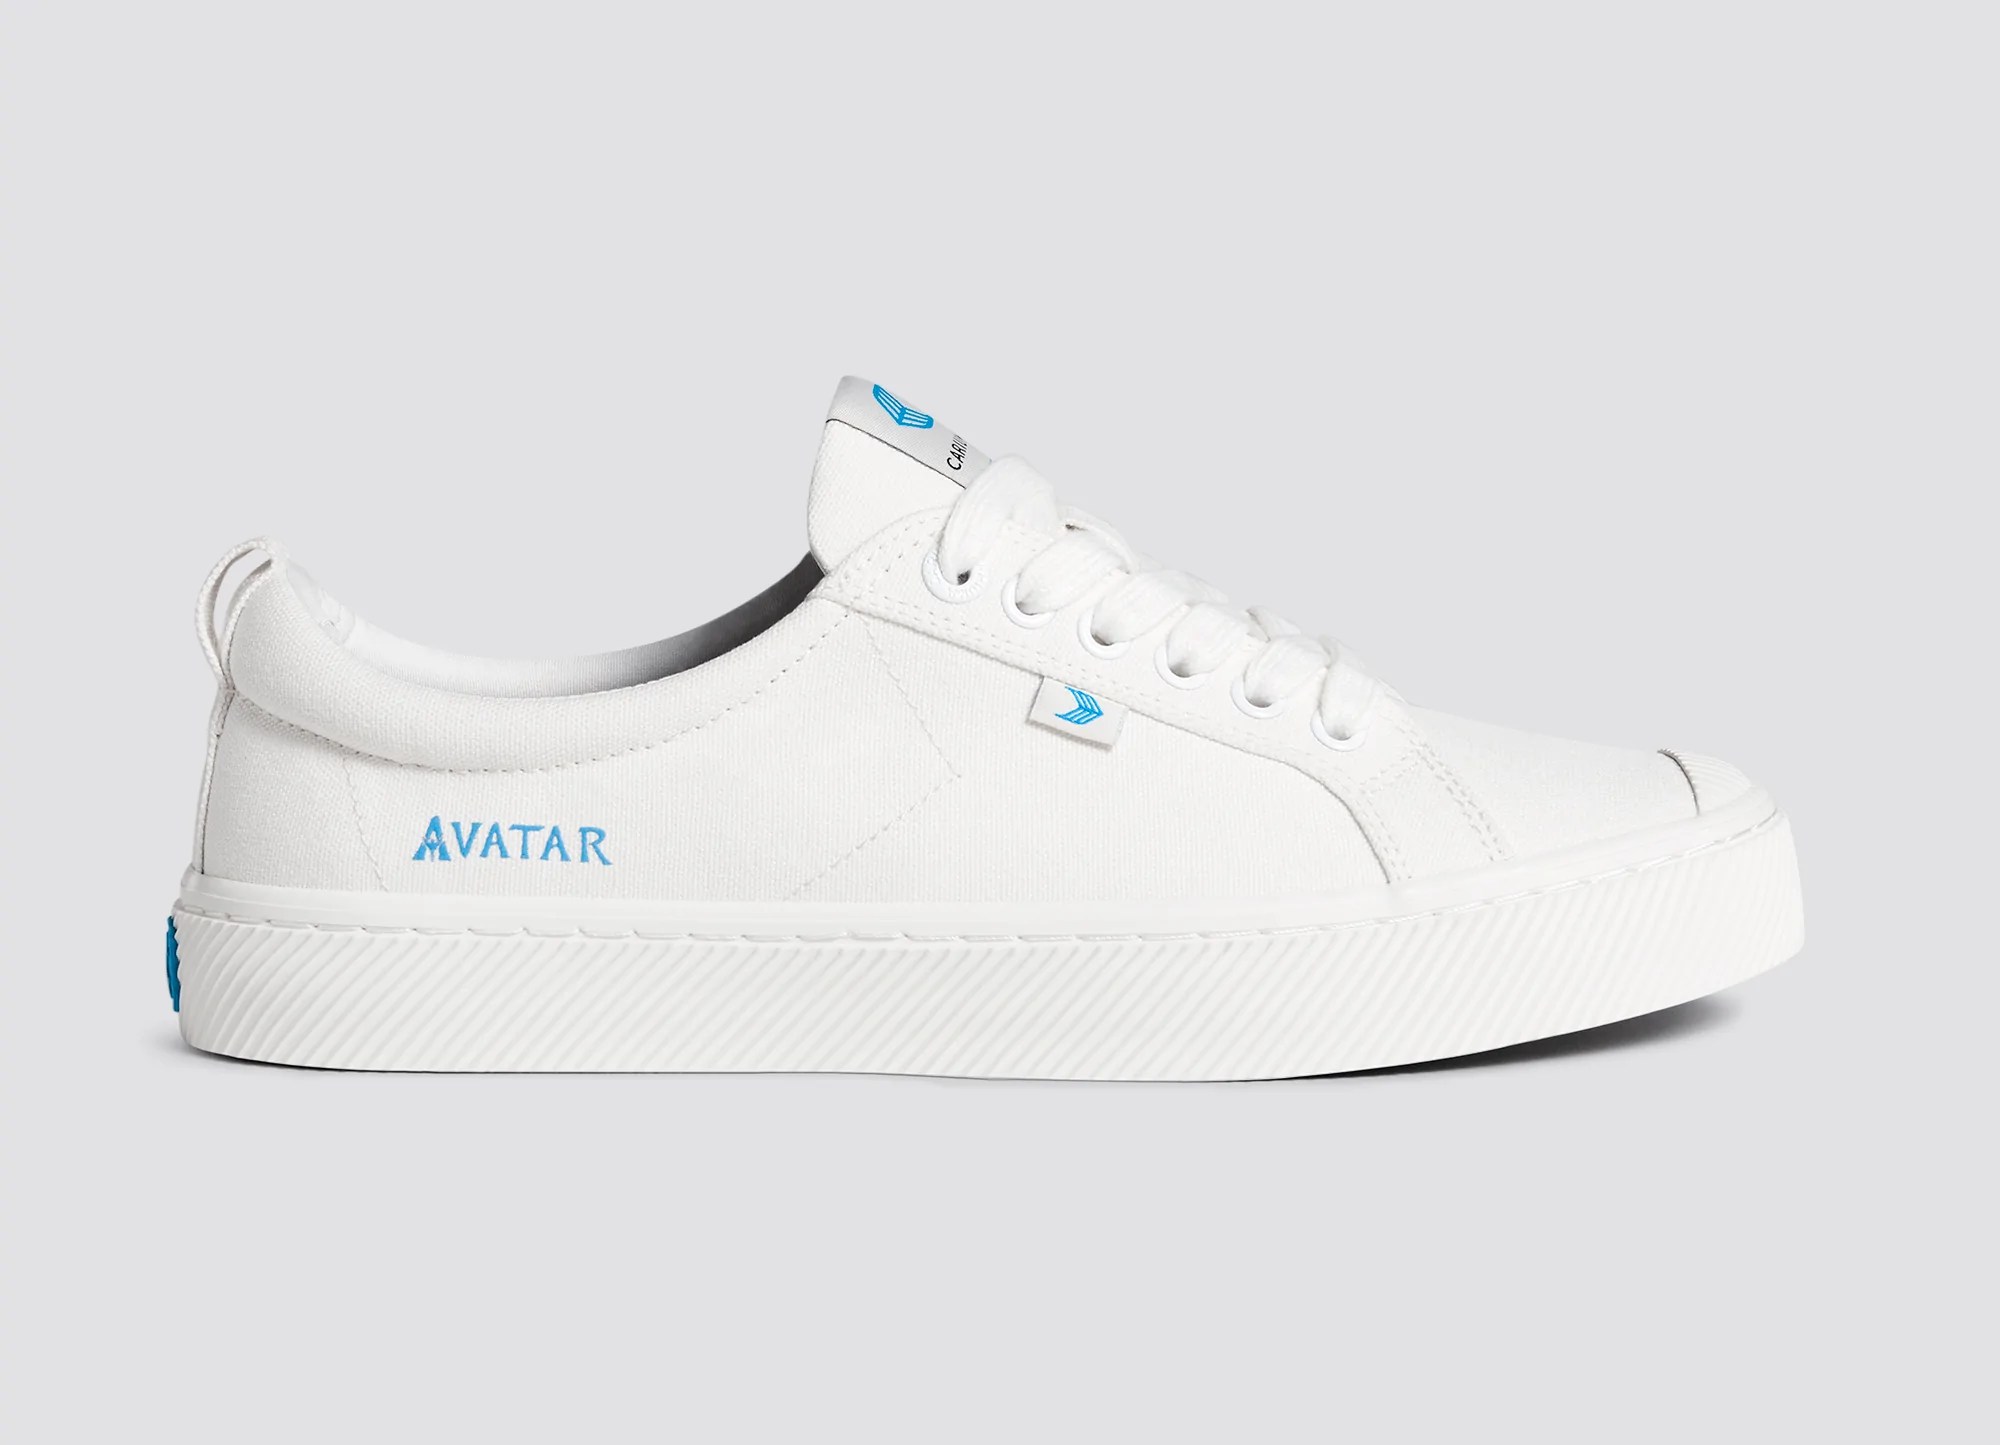 avatar oca-low sneakers from the cariuma spring collection